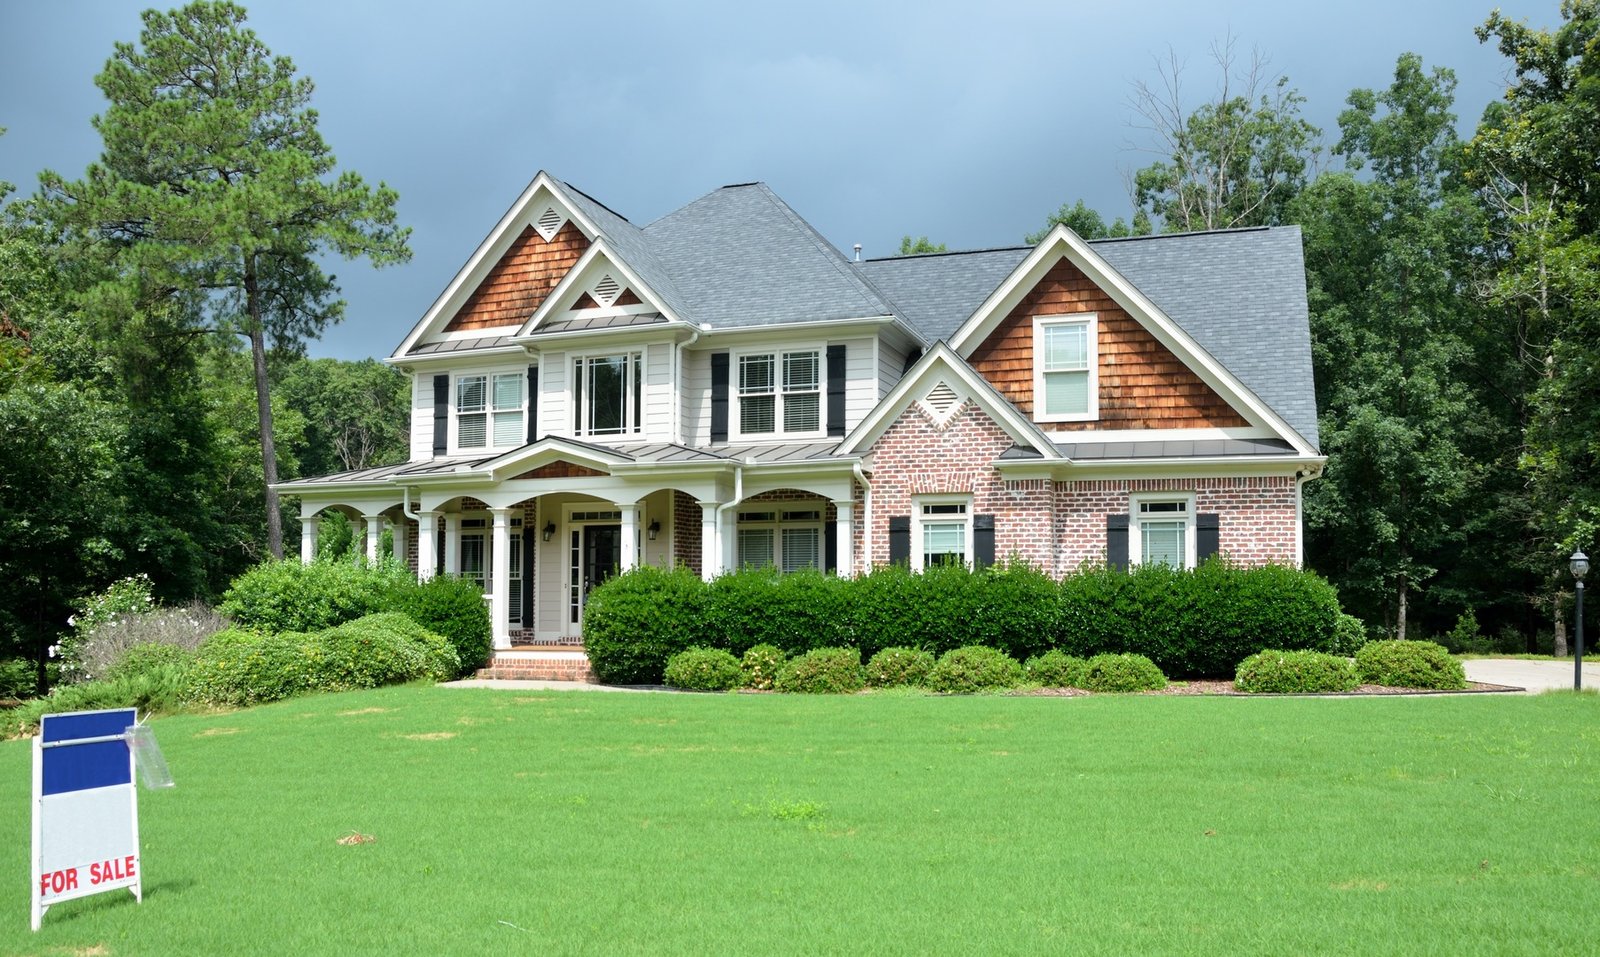 Pooler Is Popular Among Home Buyers, Here Is Why?